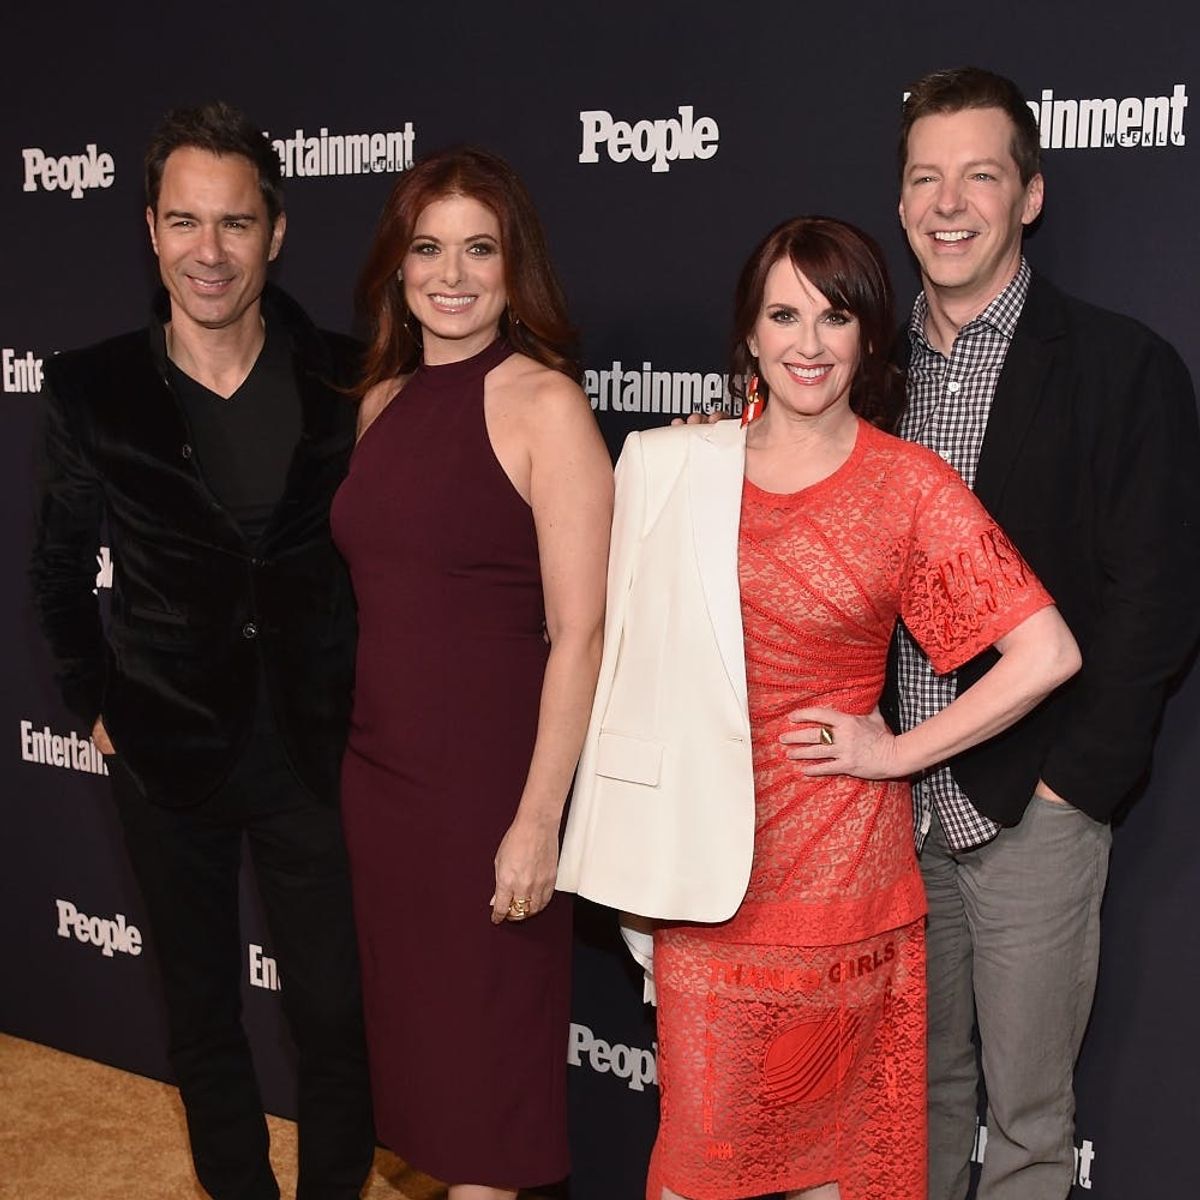 Will & Grace Released a New Promo that Proves They’re Still in the Groove